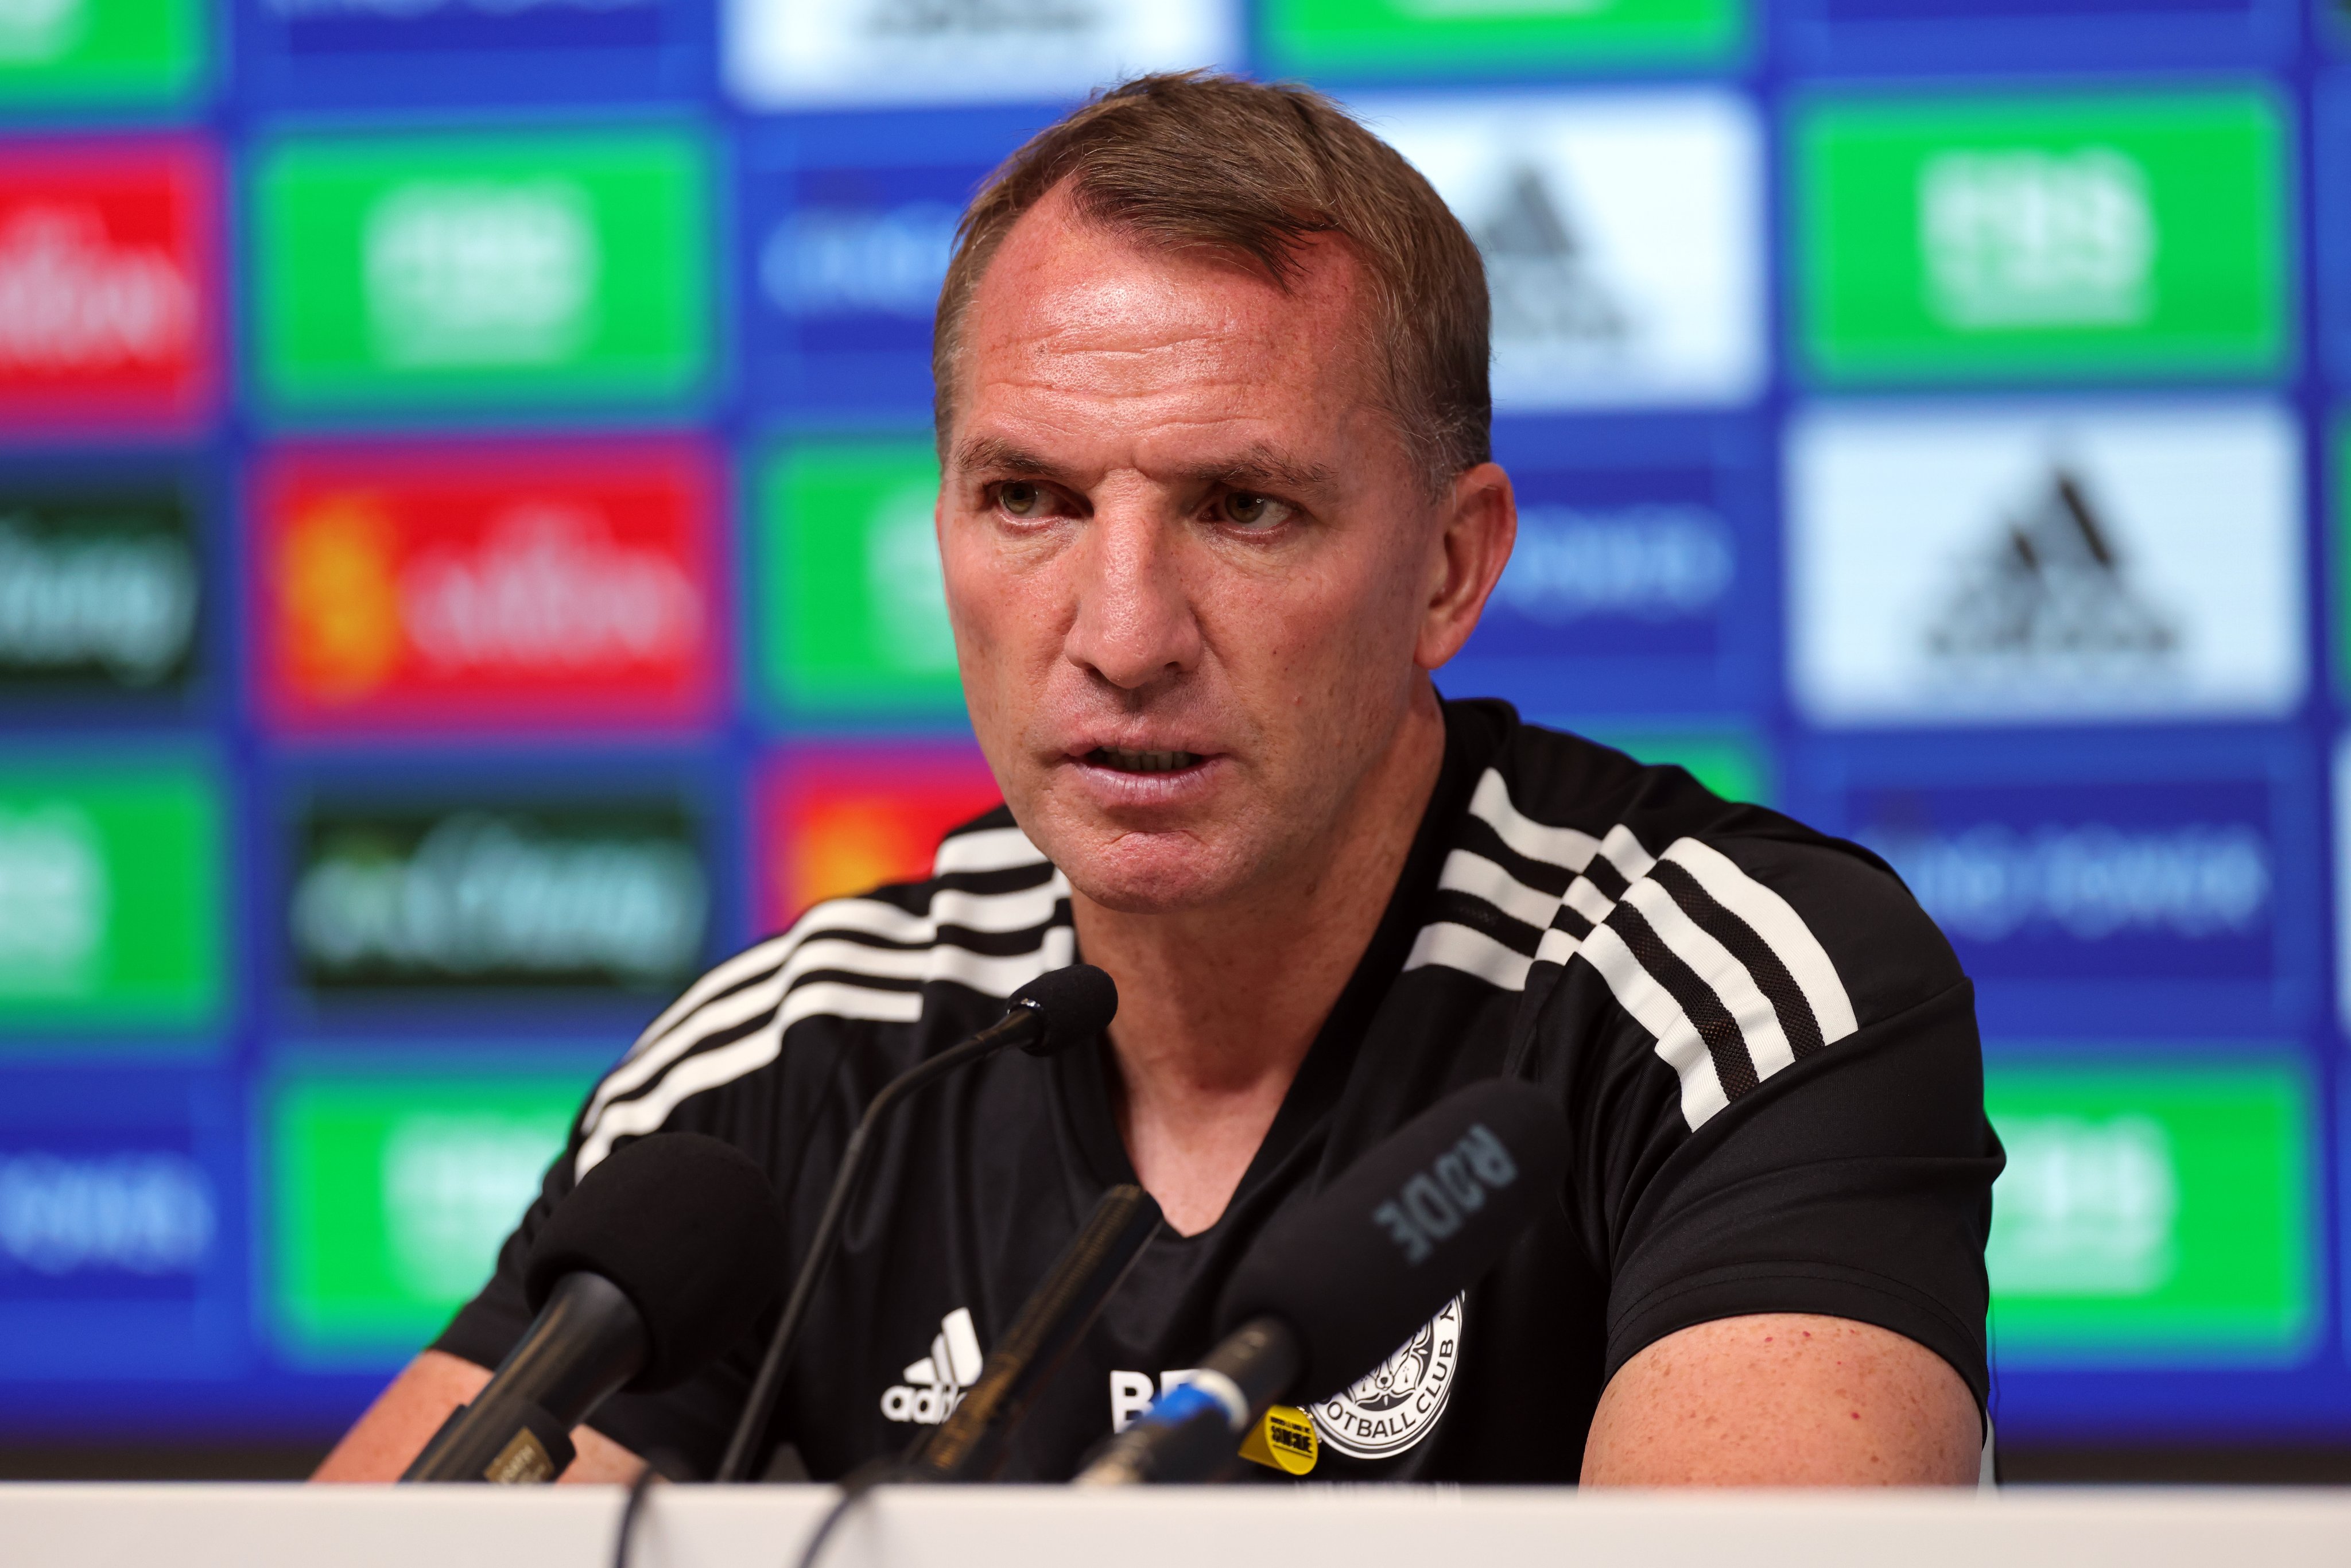 Experience allows you to see things differently and your responses are calmer, proclaims Brendan Rodgers